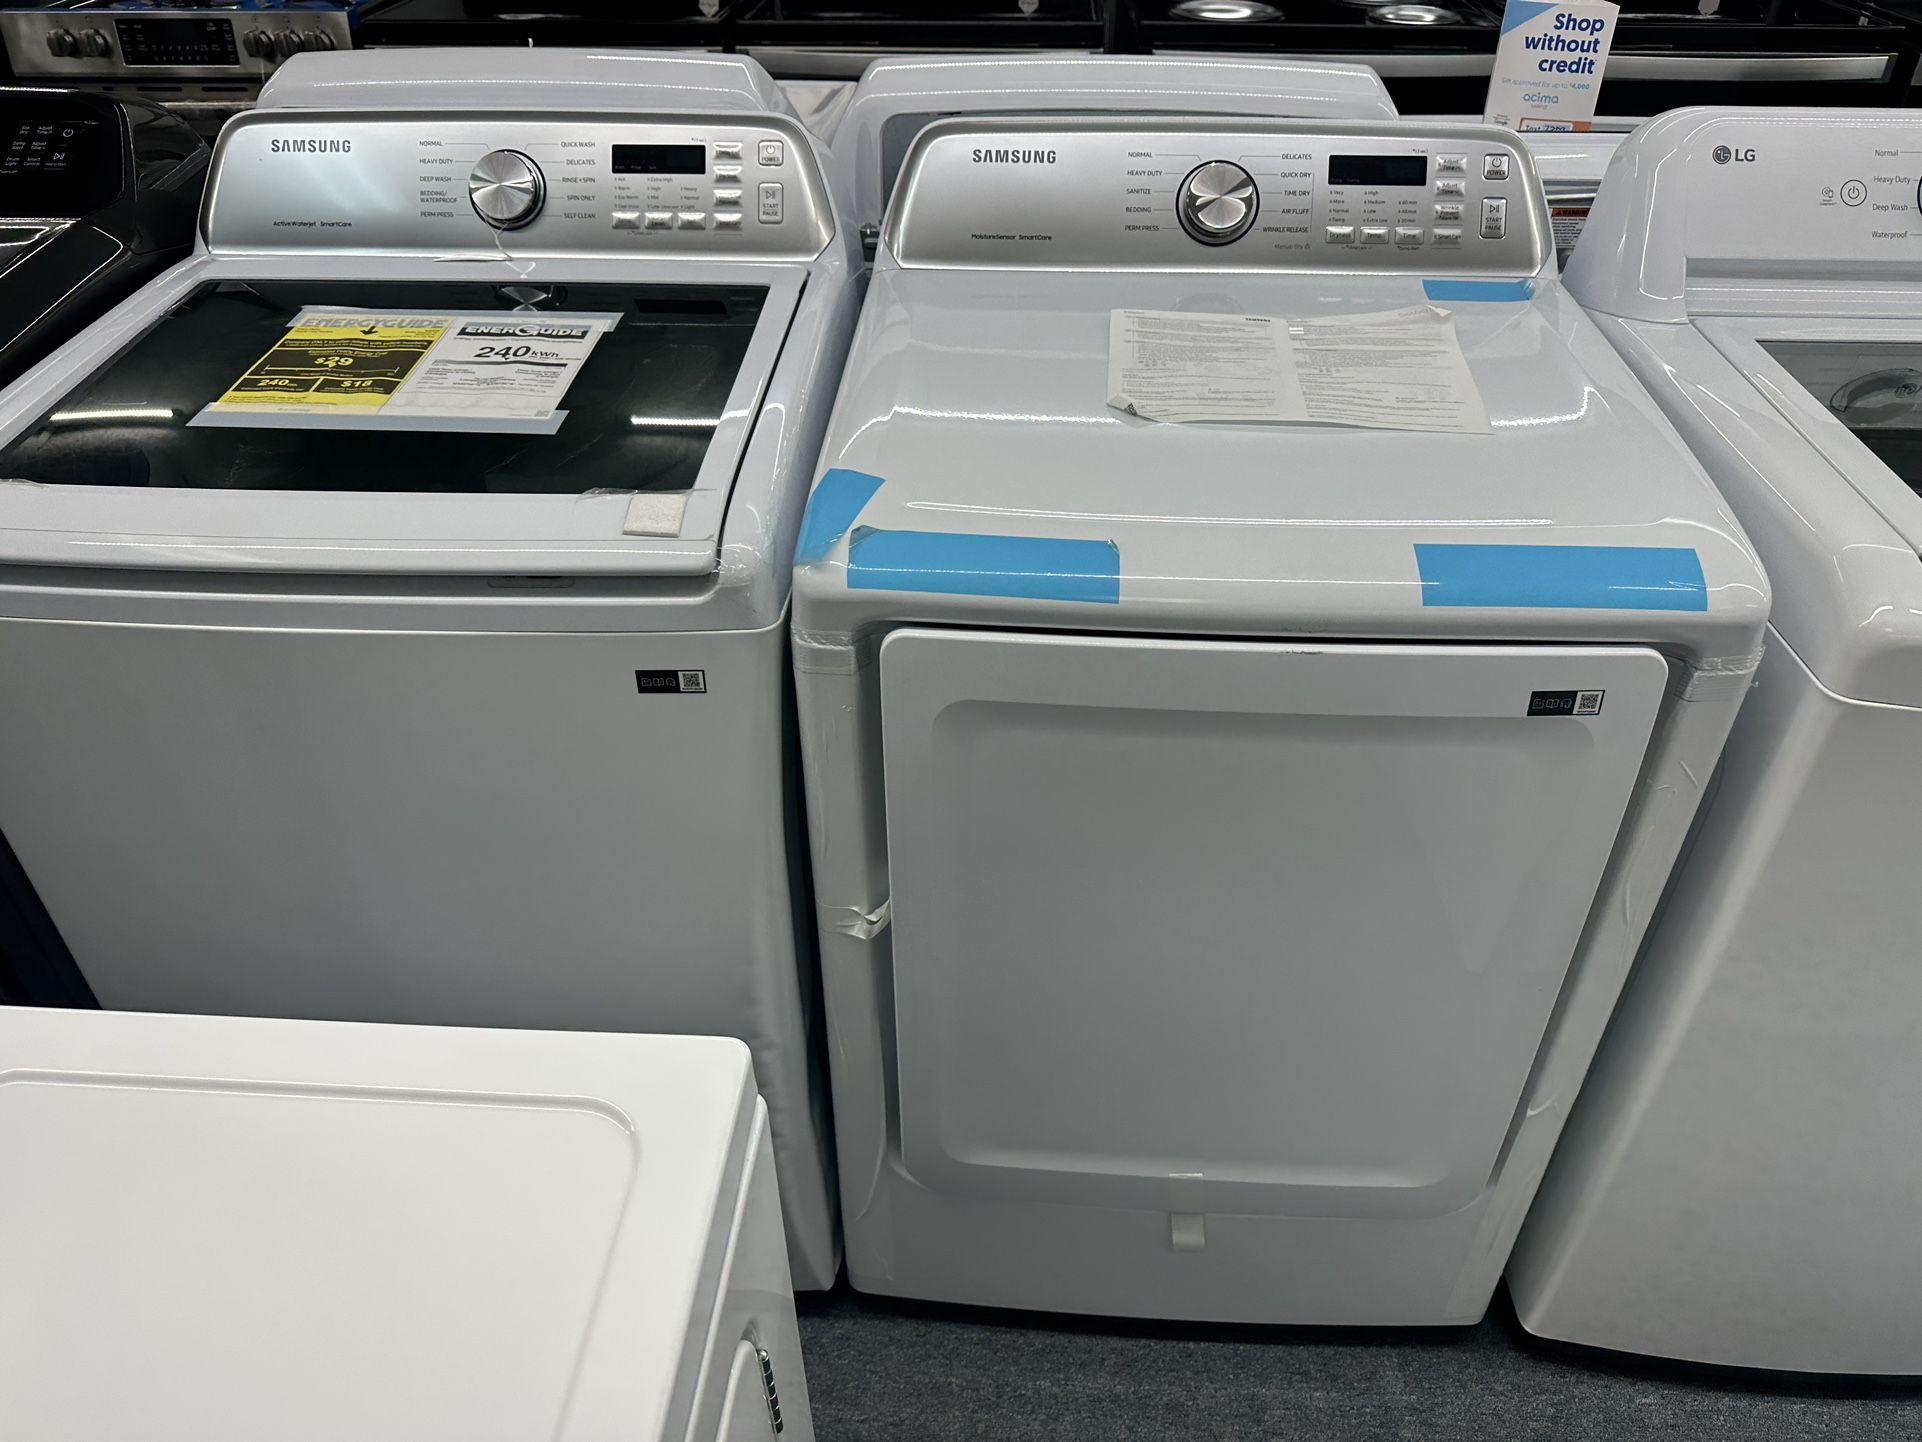 New Scratch And Dent Samsung Washer And Dryer Set 1 Year Warranty 